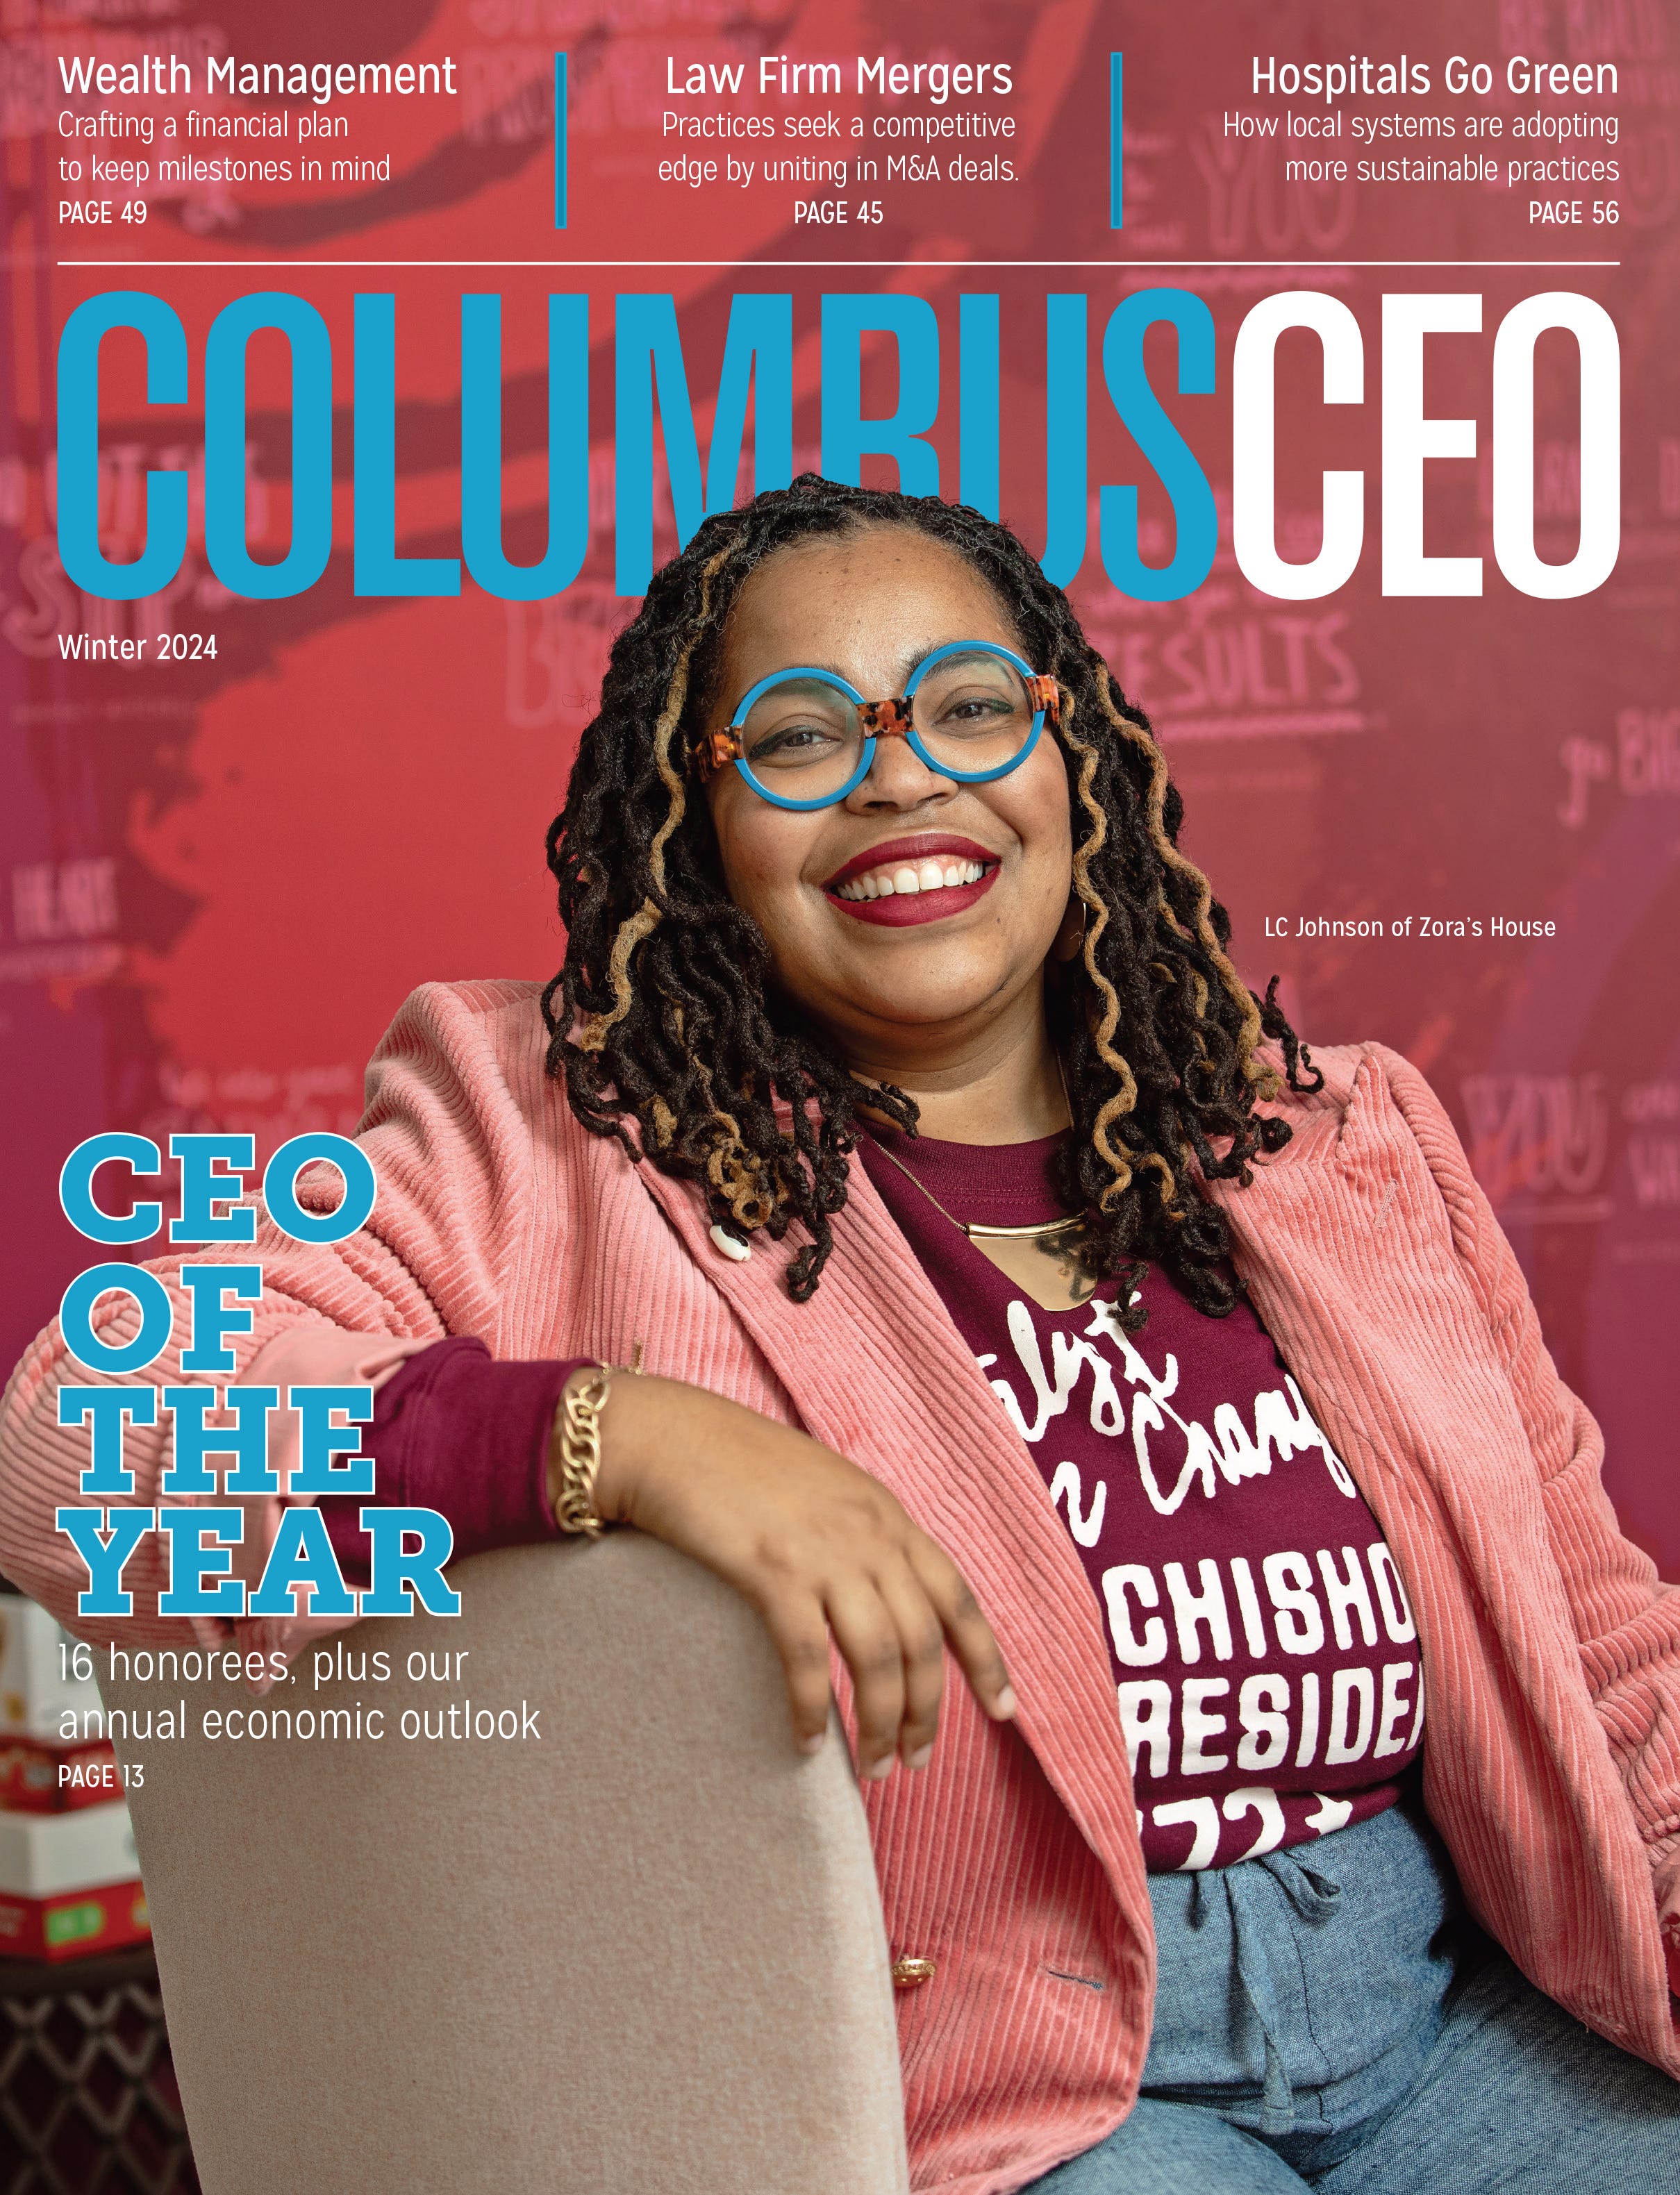 The Winter 2024 issue of Columbus CEO features our annual CEO of the Year awards. One of this year’s recipients is LC Johnson of Zora’s House